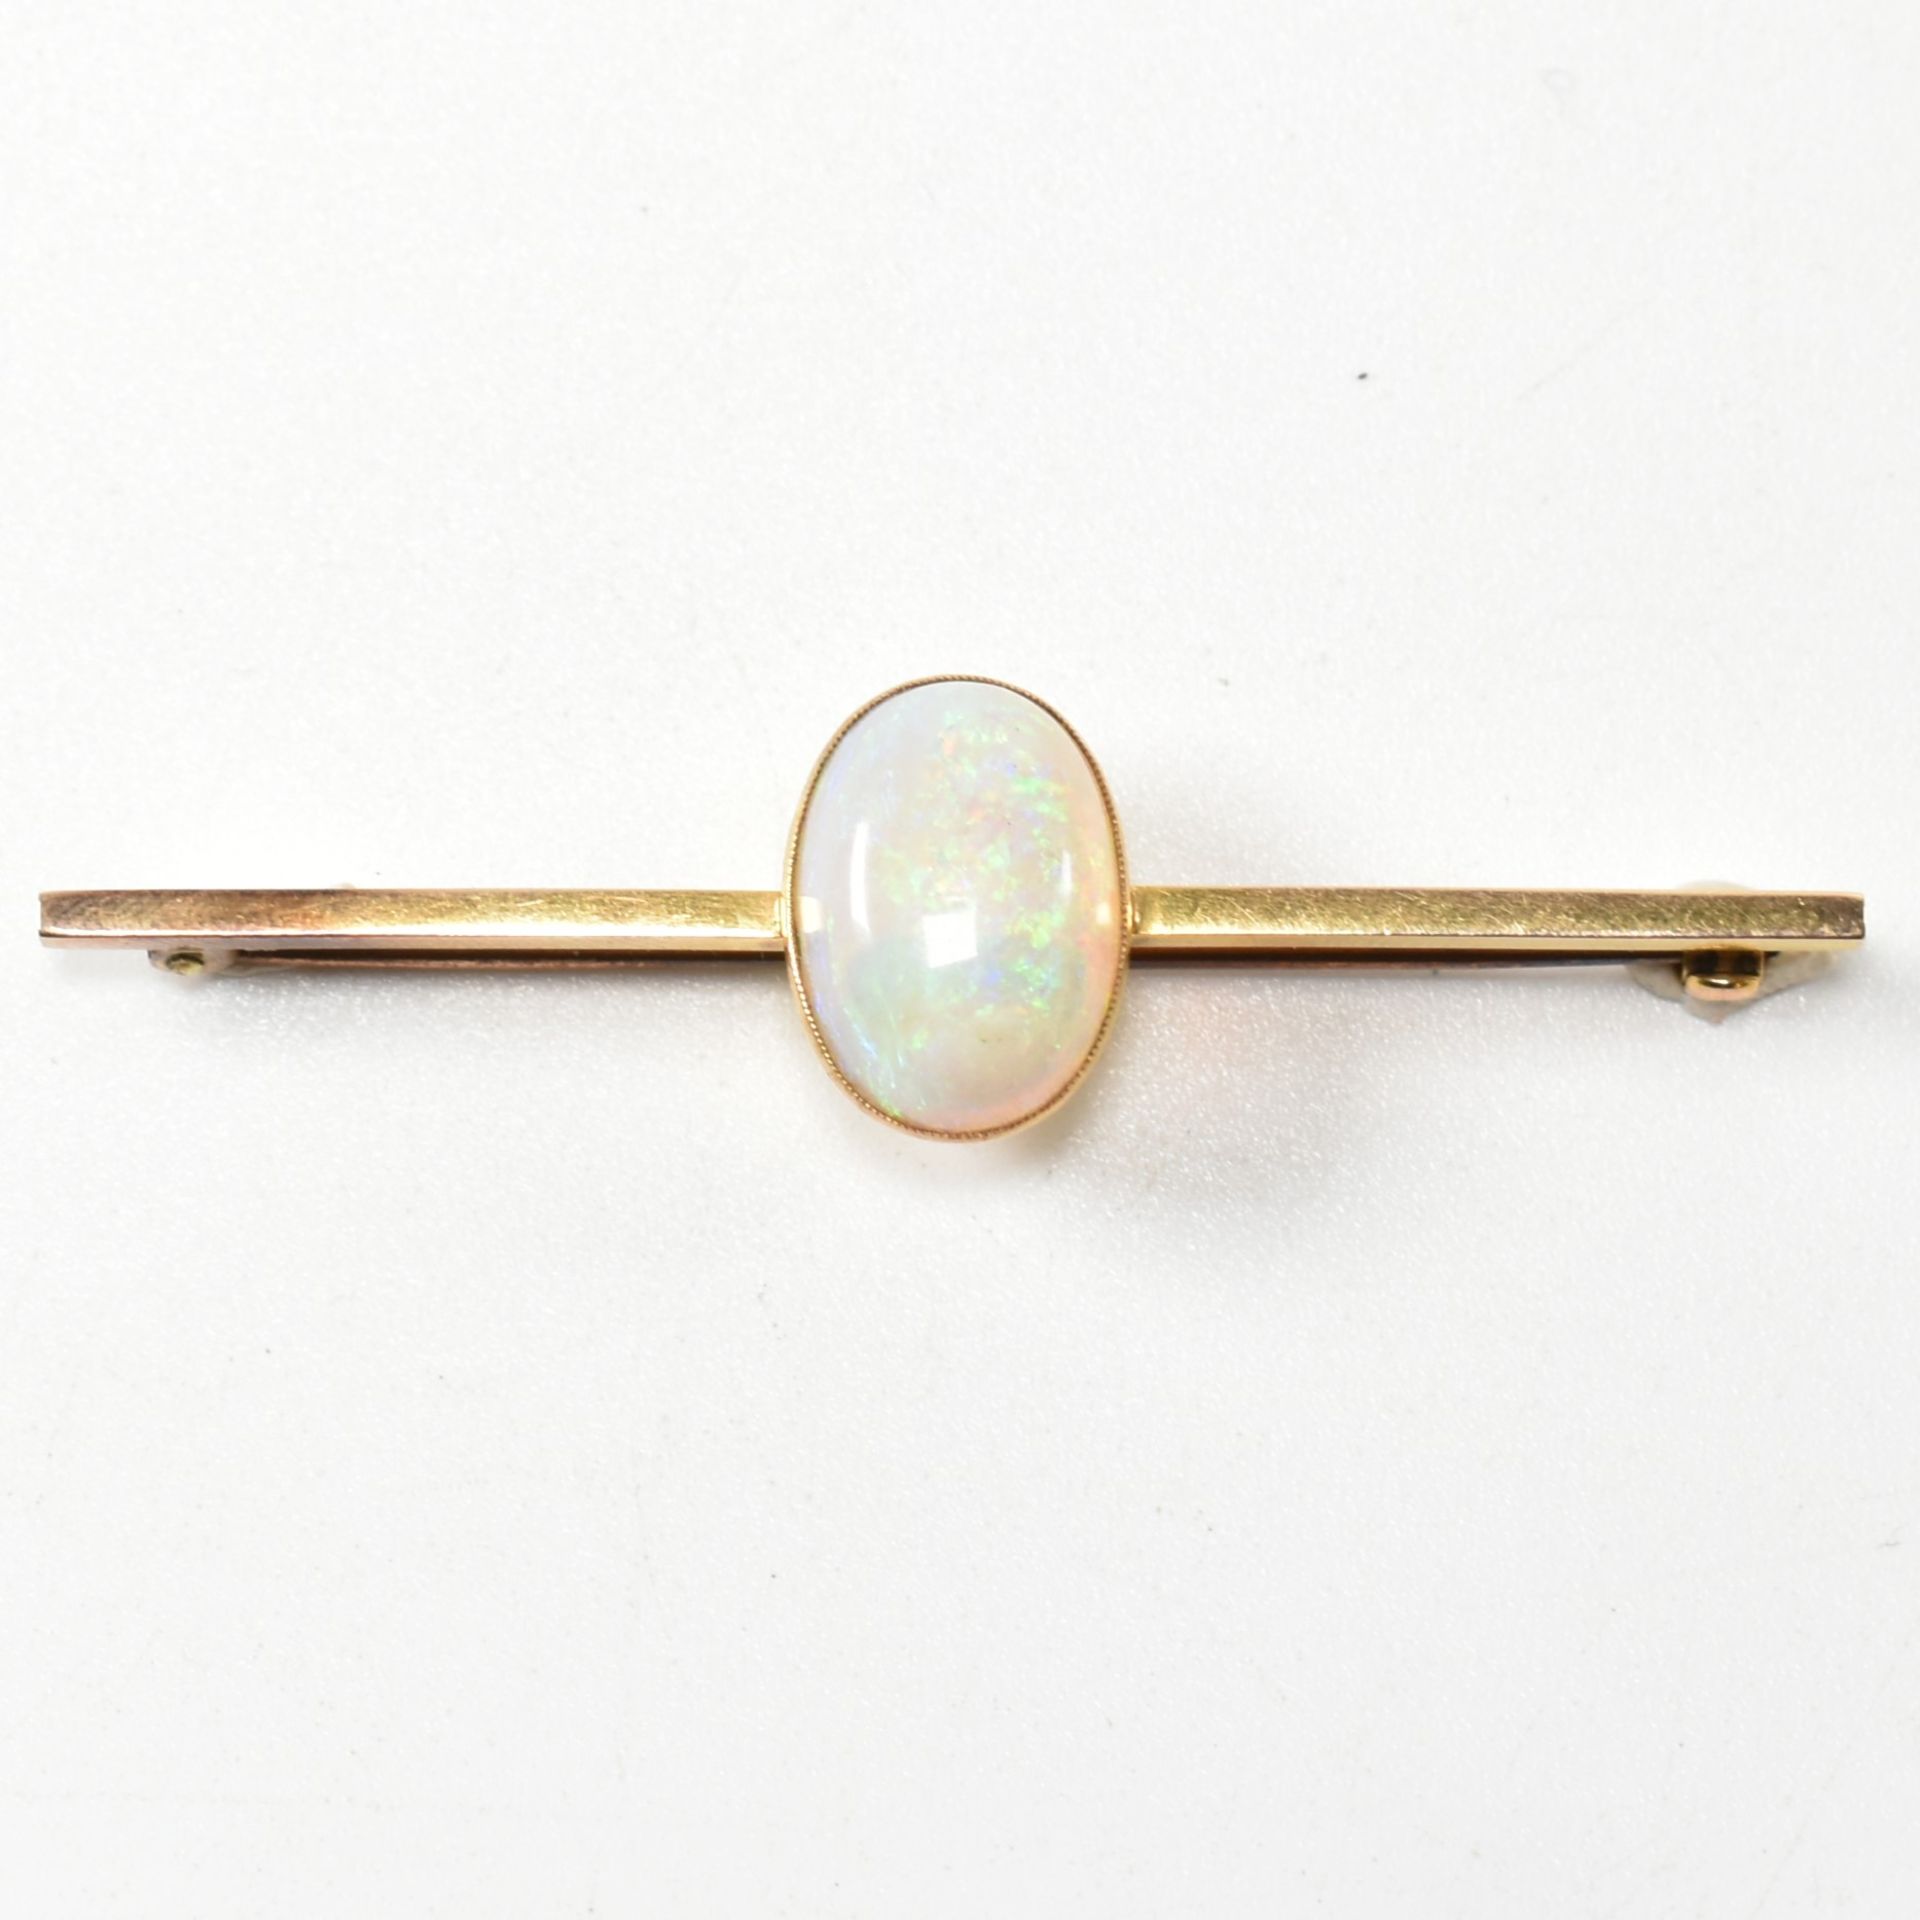 EARLY 20TH CENTURY 15CT GOLD & OPAL BAR BROOCH PIN